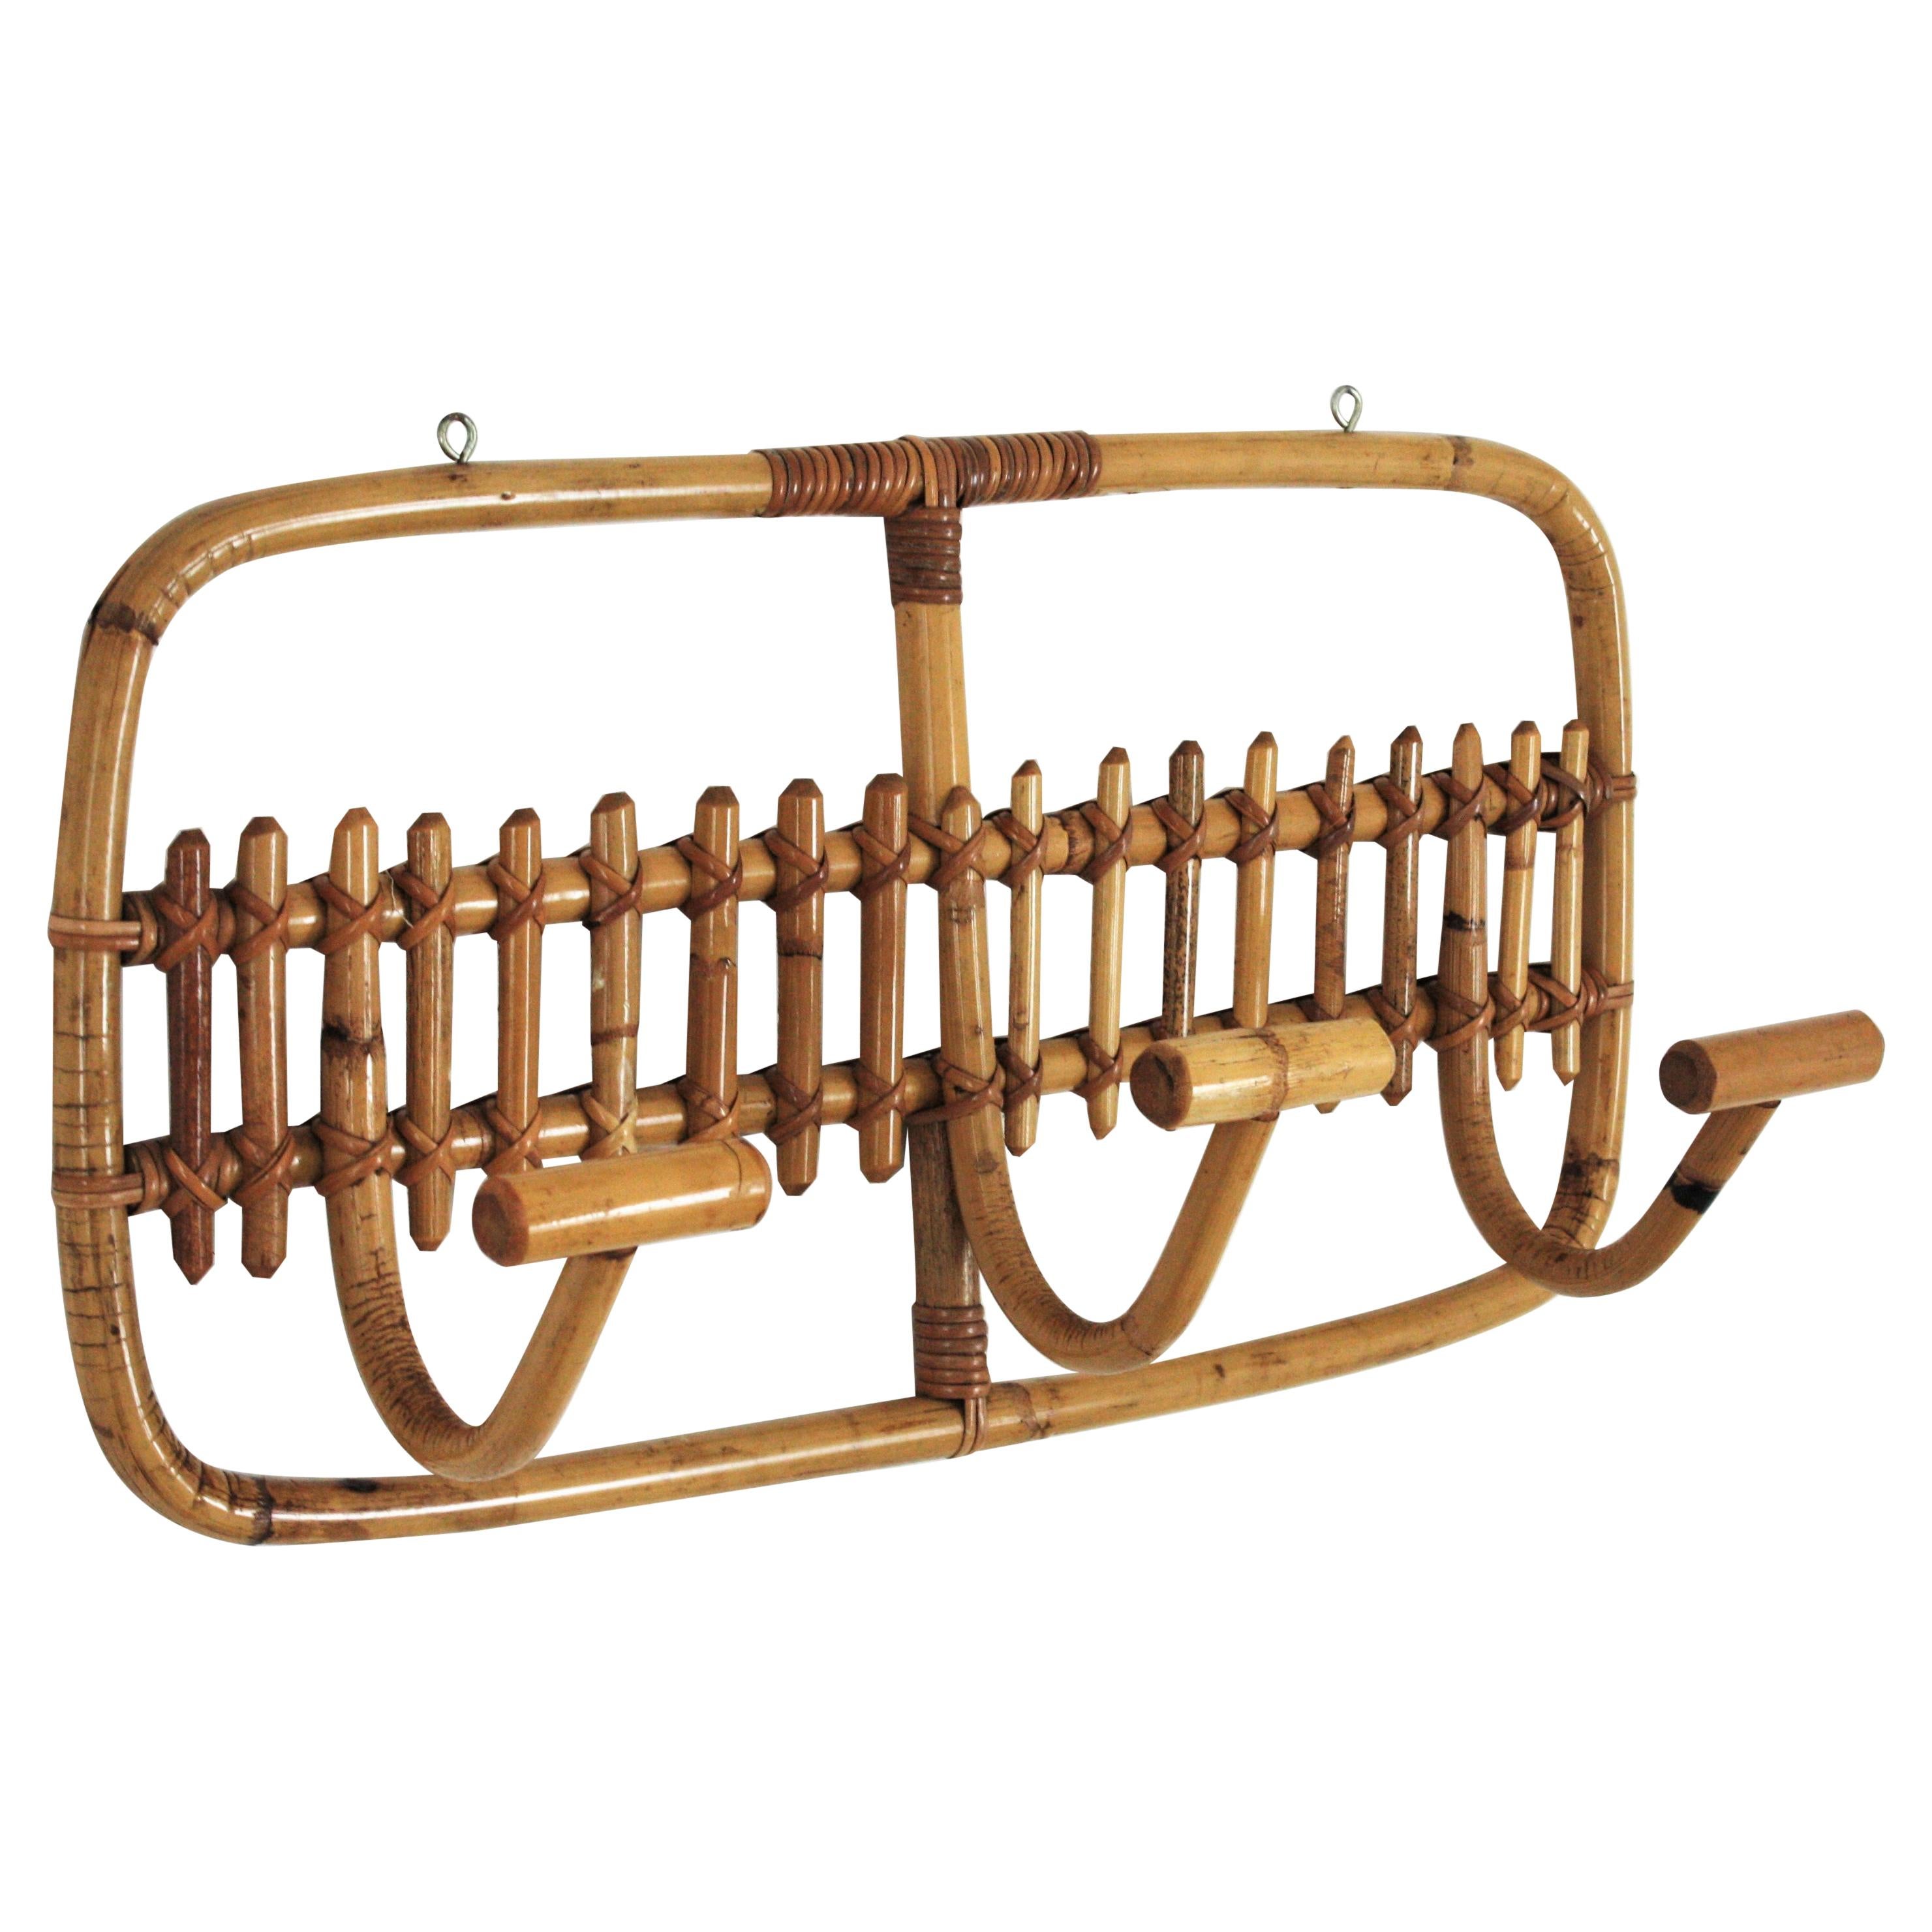 Eye-catching Italian bamboo wall coat rack stand, 1960s
Rectangular shape with 3 hooks.
It has all the taste of the Italian Riviera style.
This wall-mounted coat rack will be a nice mid-century mediterranean addition to any beach house,